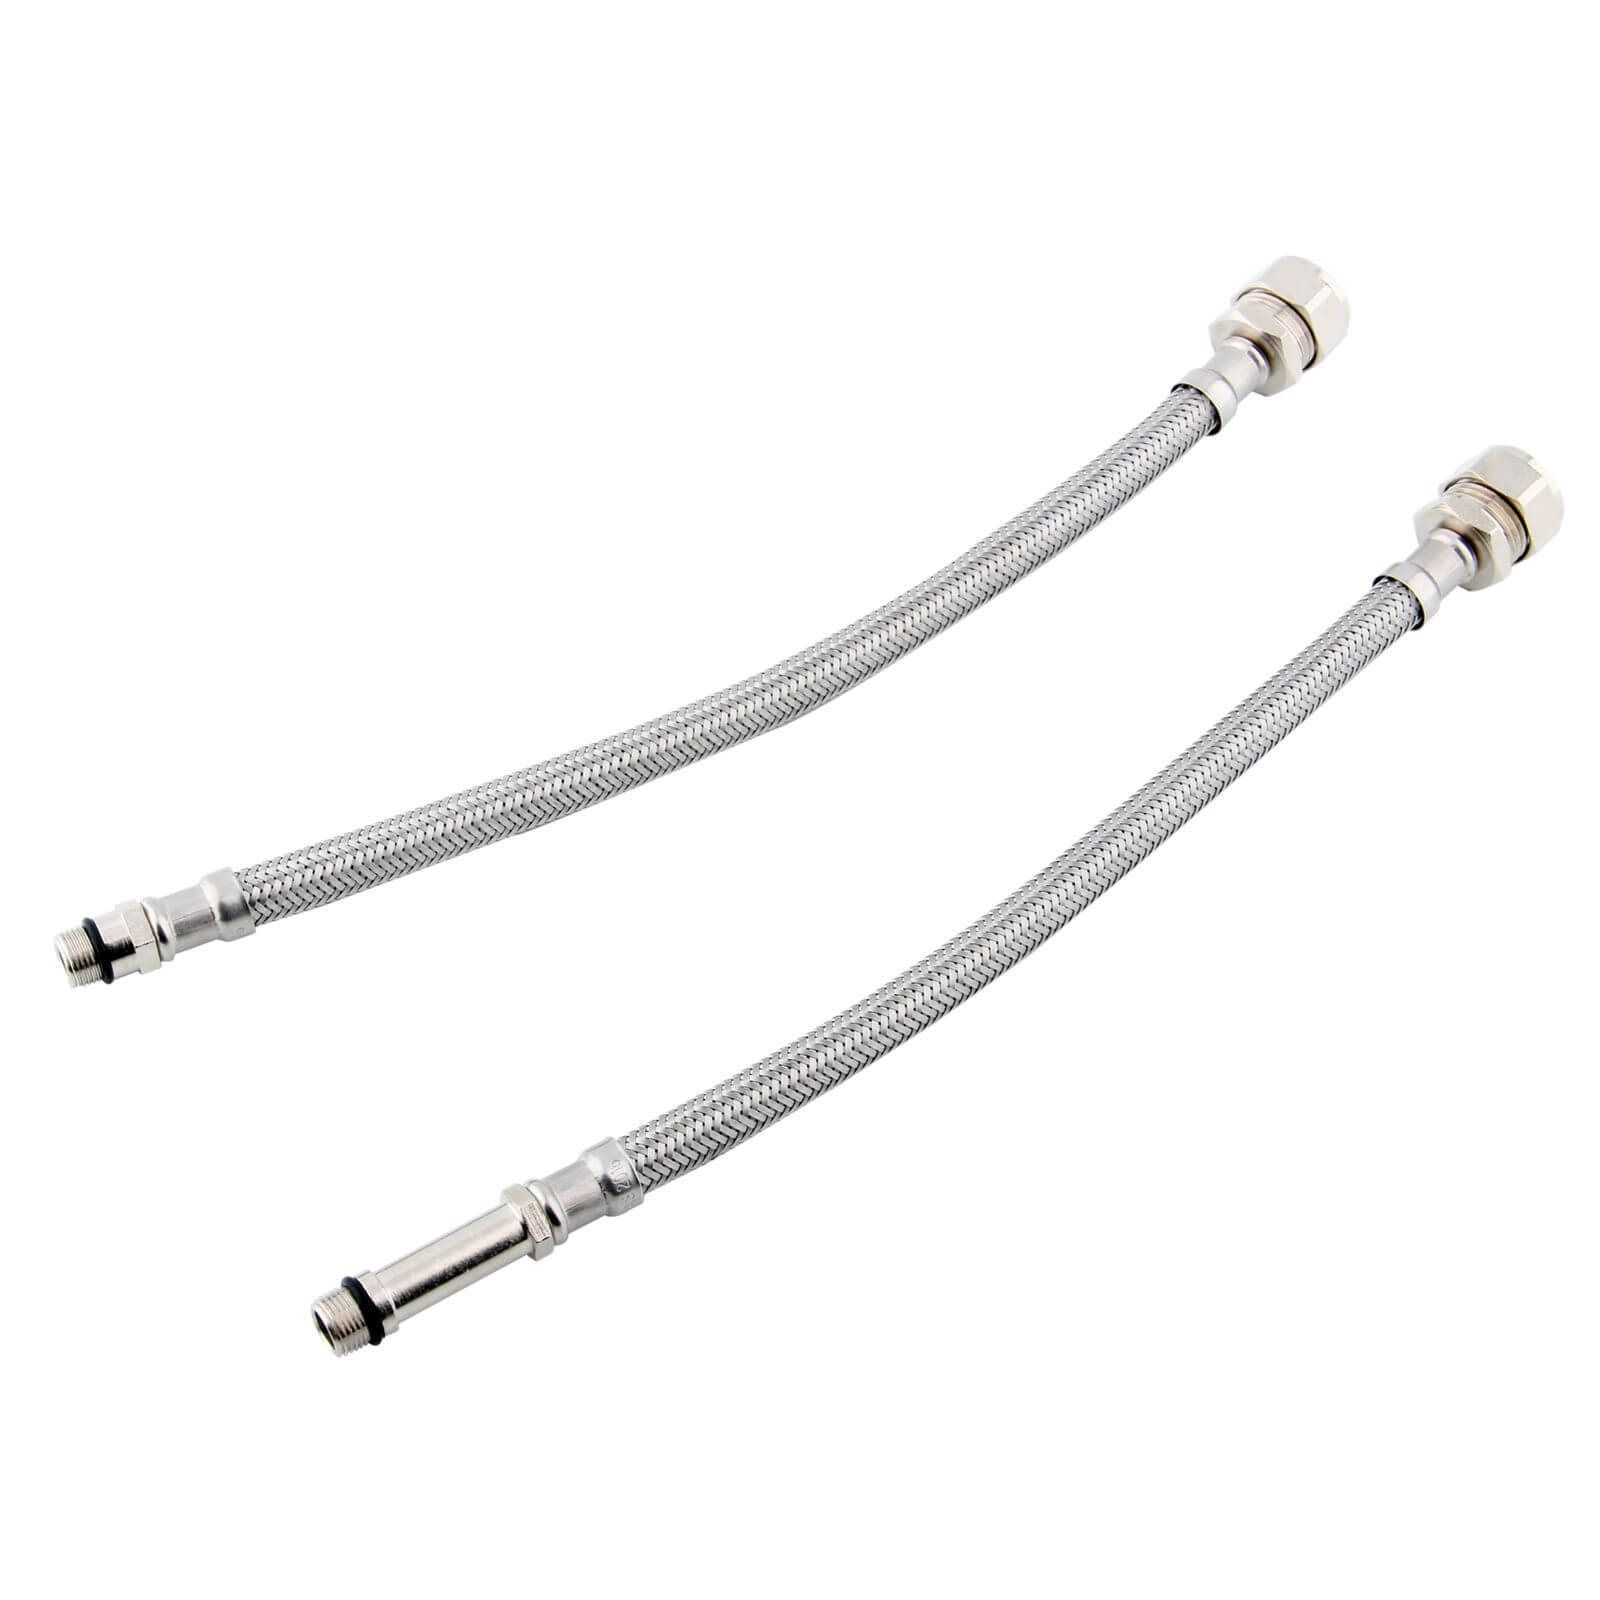 Kinetic Flexible MonoB Tap Connector - 15mm x M12 x 300mm - 2 Pack - WRAS Approved